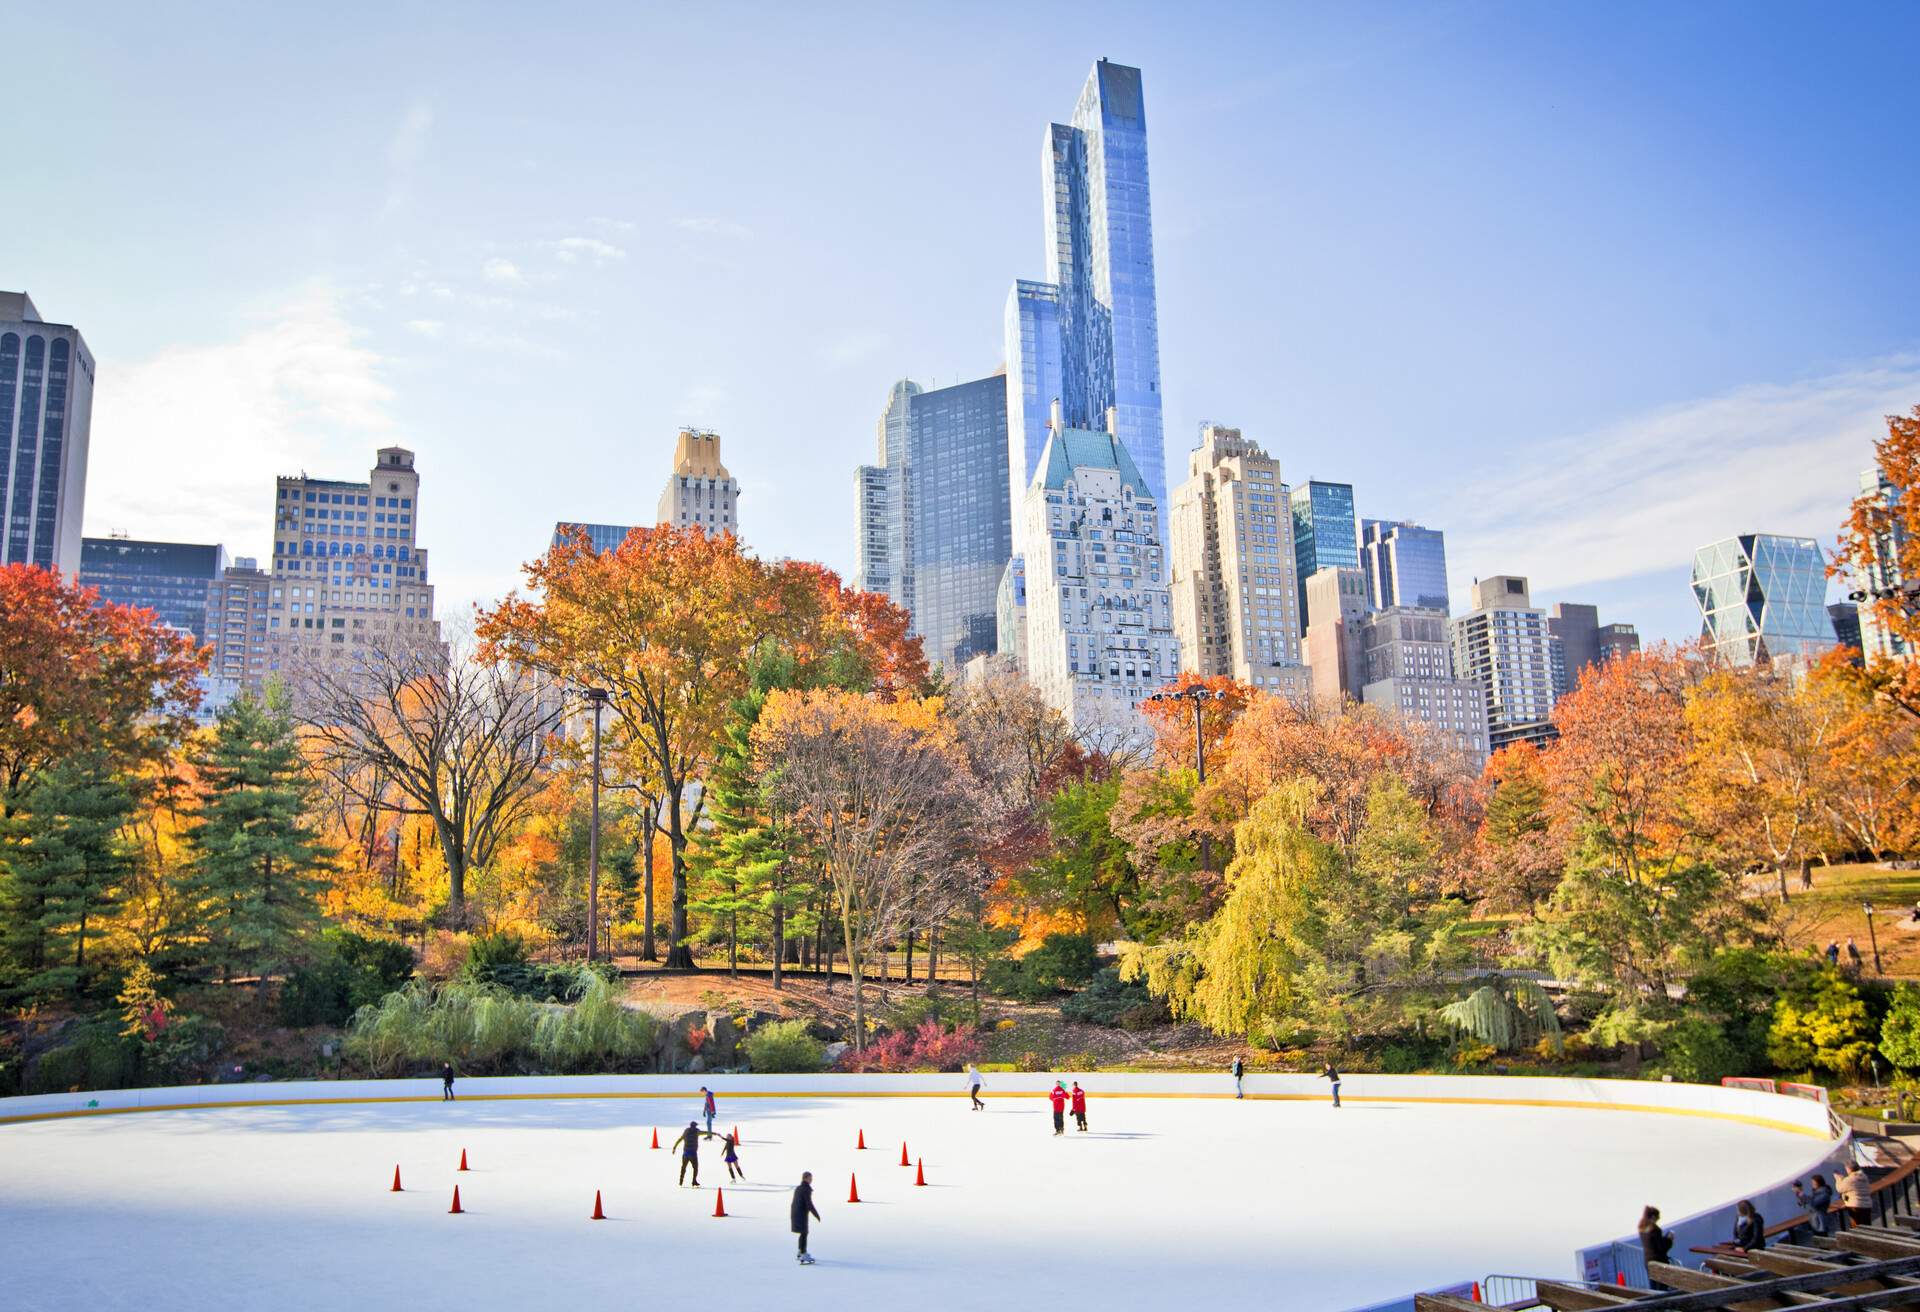 People skating on a park's ice rink surrounded by colourful autumn trees with views of modern skyscrapers.